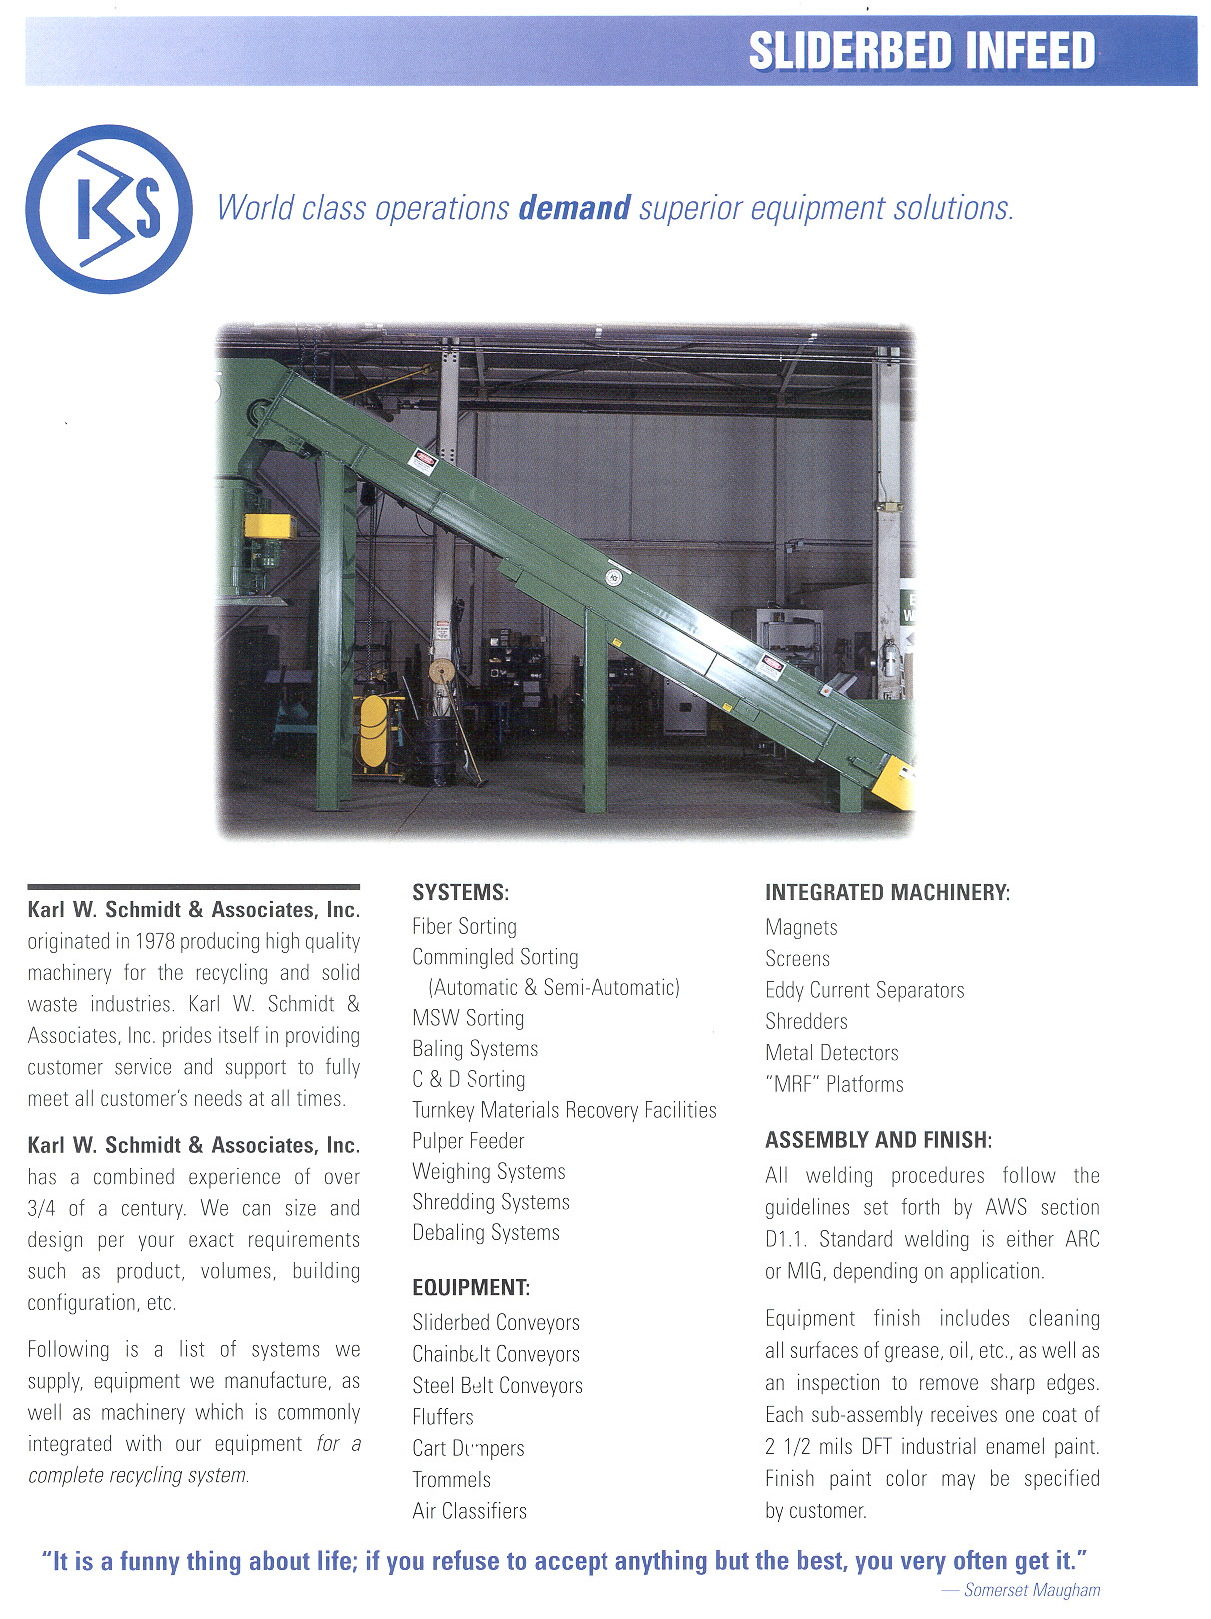 Learn more about the Sliderbed Conveyor in the Karl W. Schmidt Brochure.